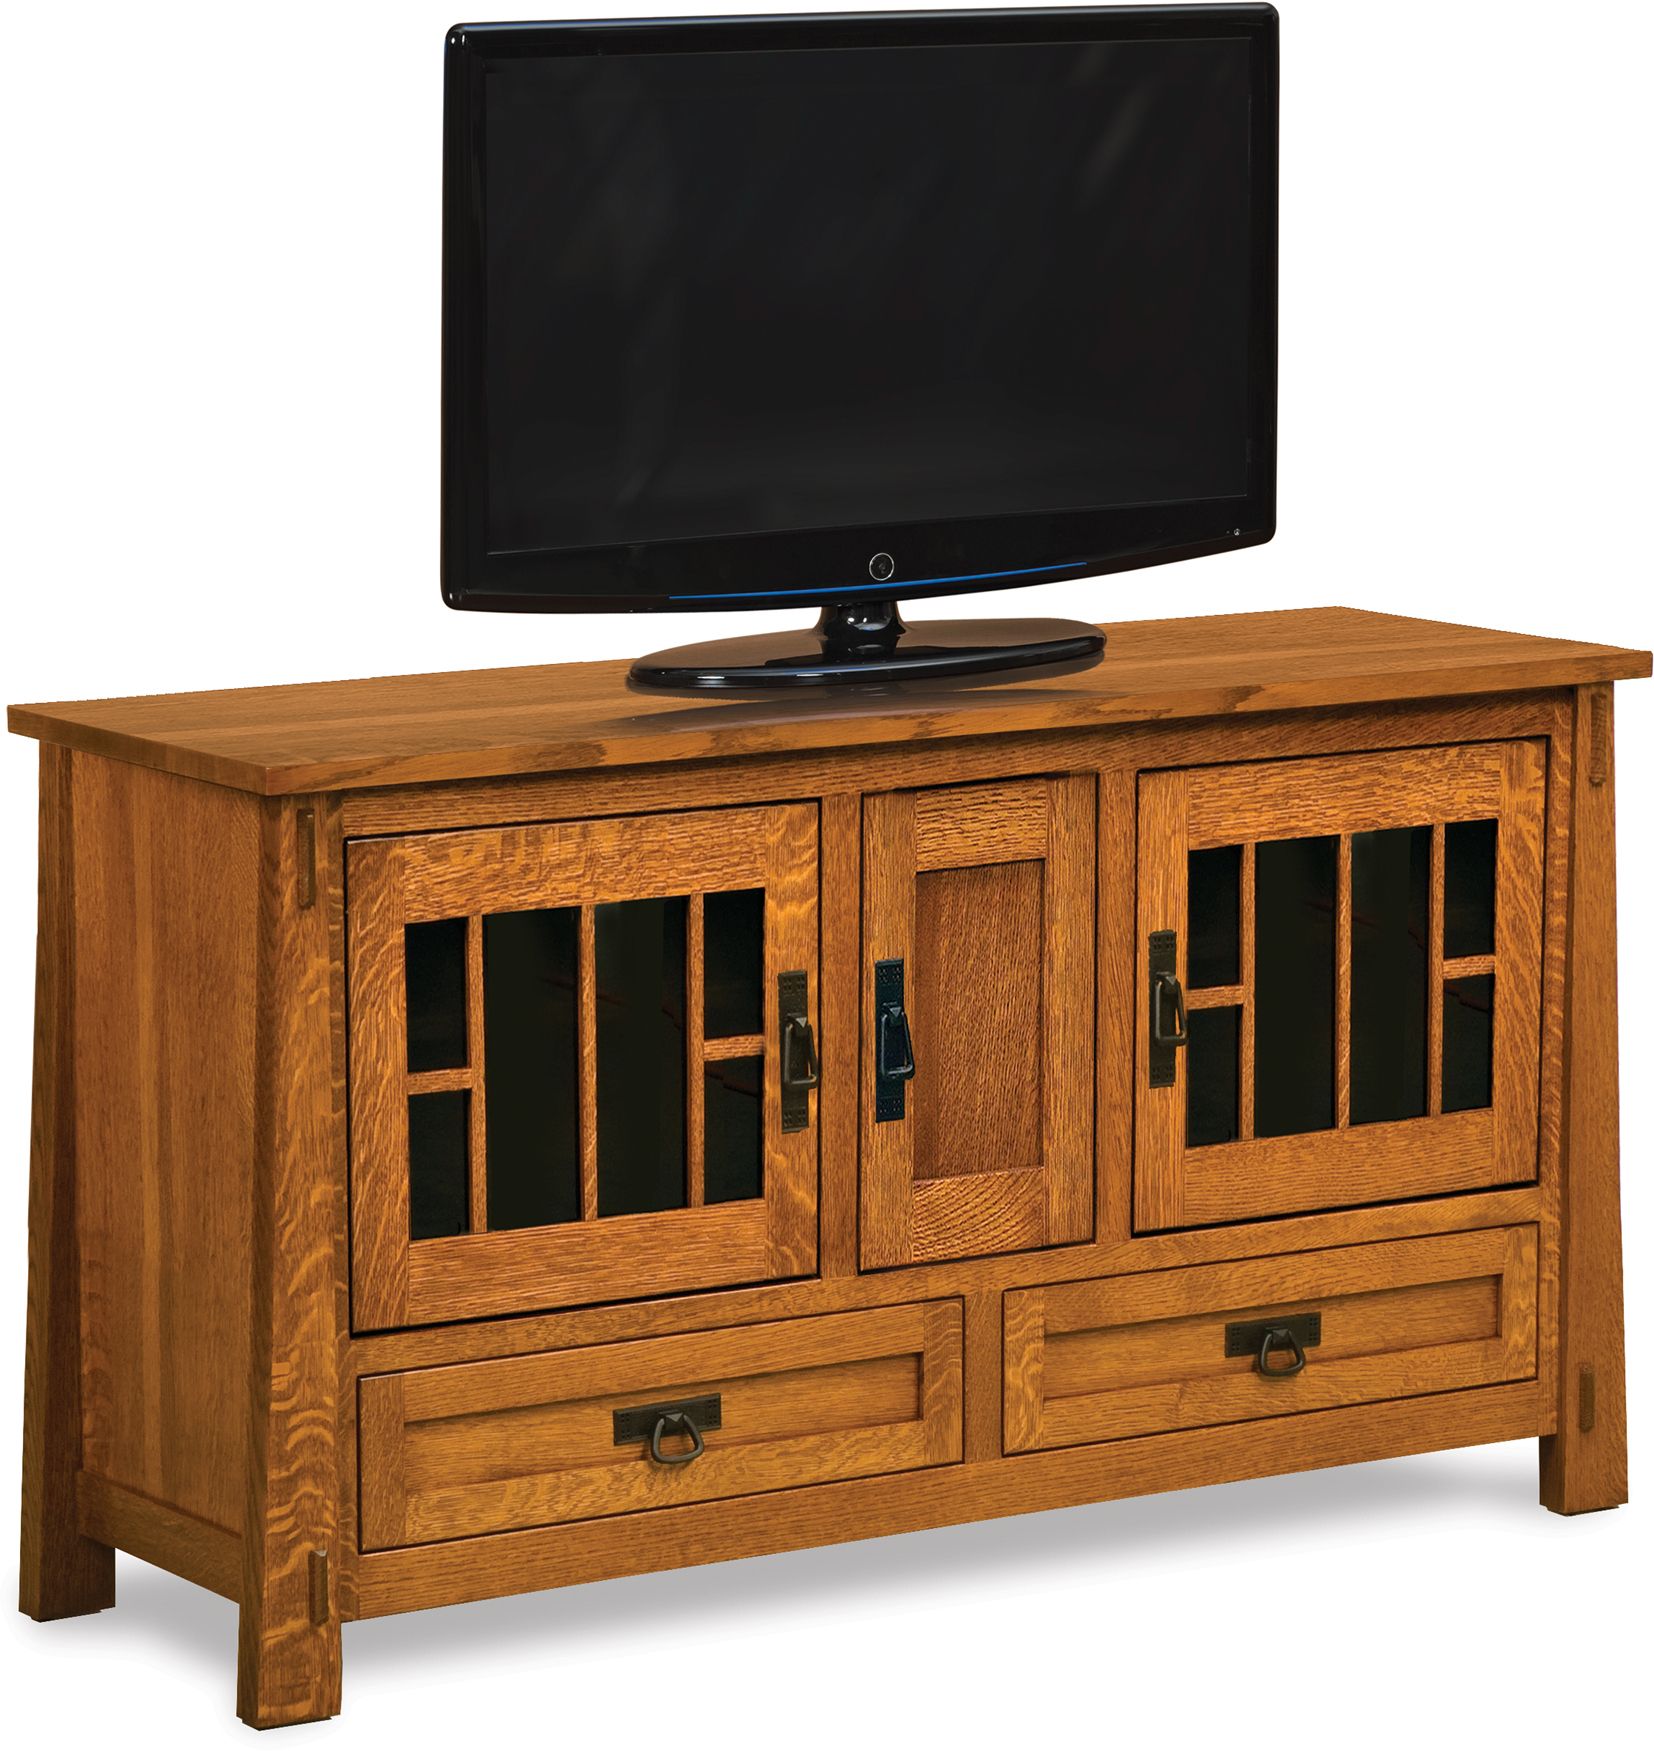 Modesto High Tv Stand | Indiana Amish Modesto Tall Lcd Stand Inside Elevated Tv Stands (View 8 of 15)